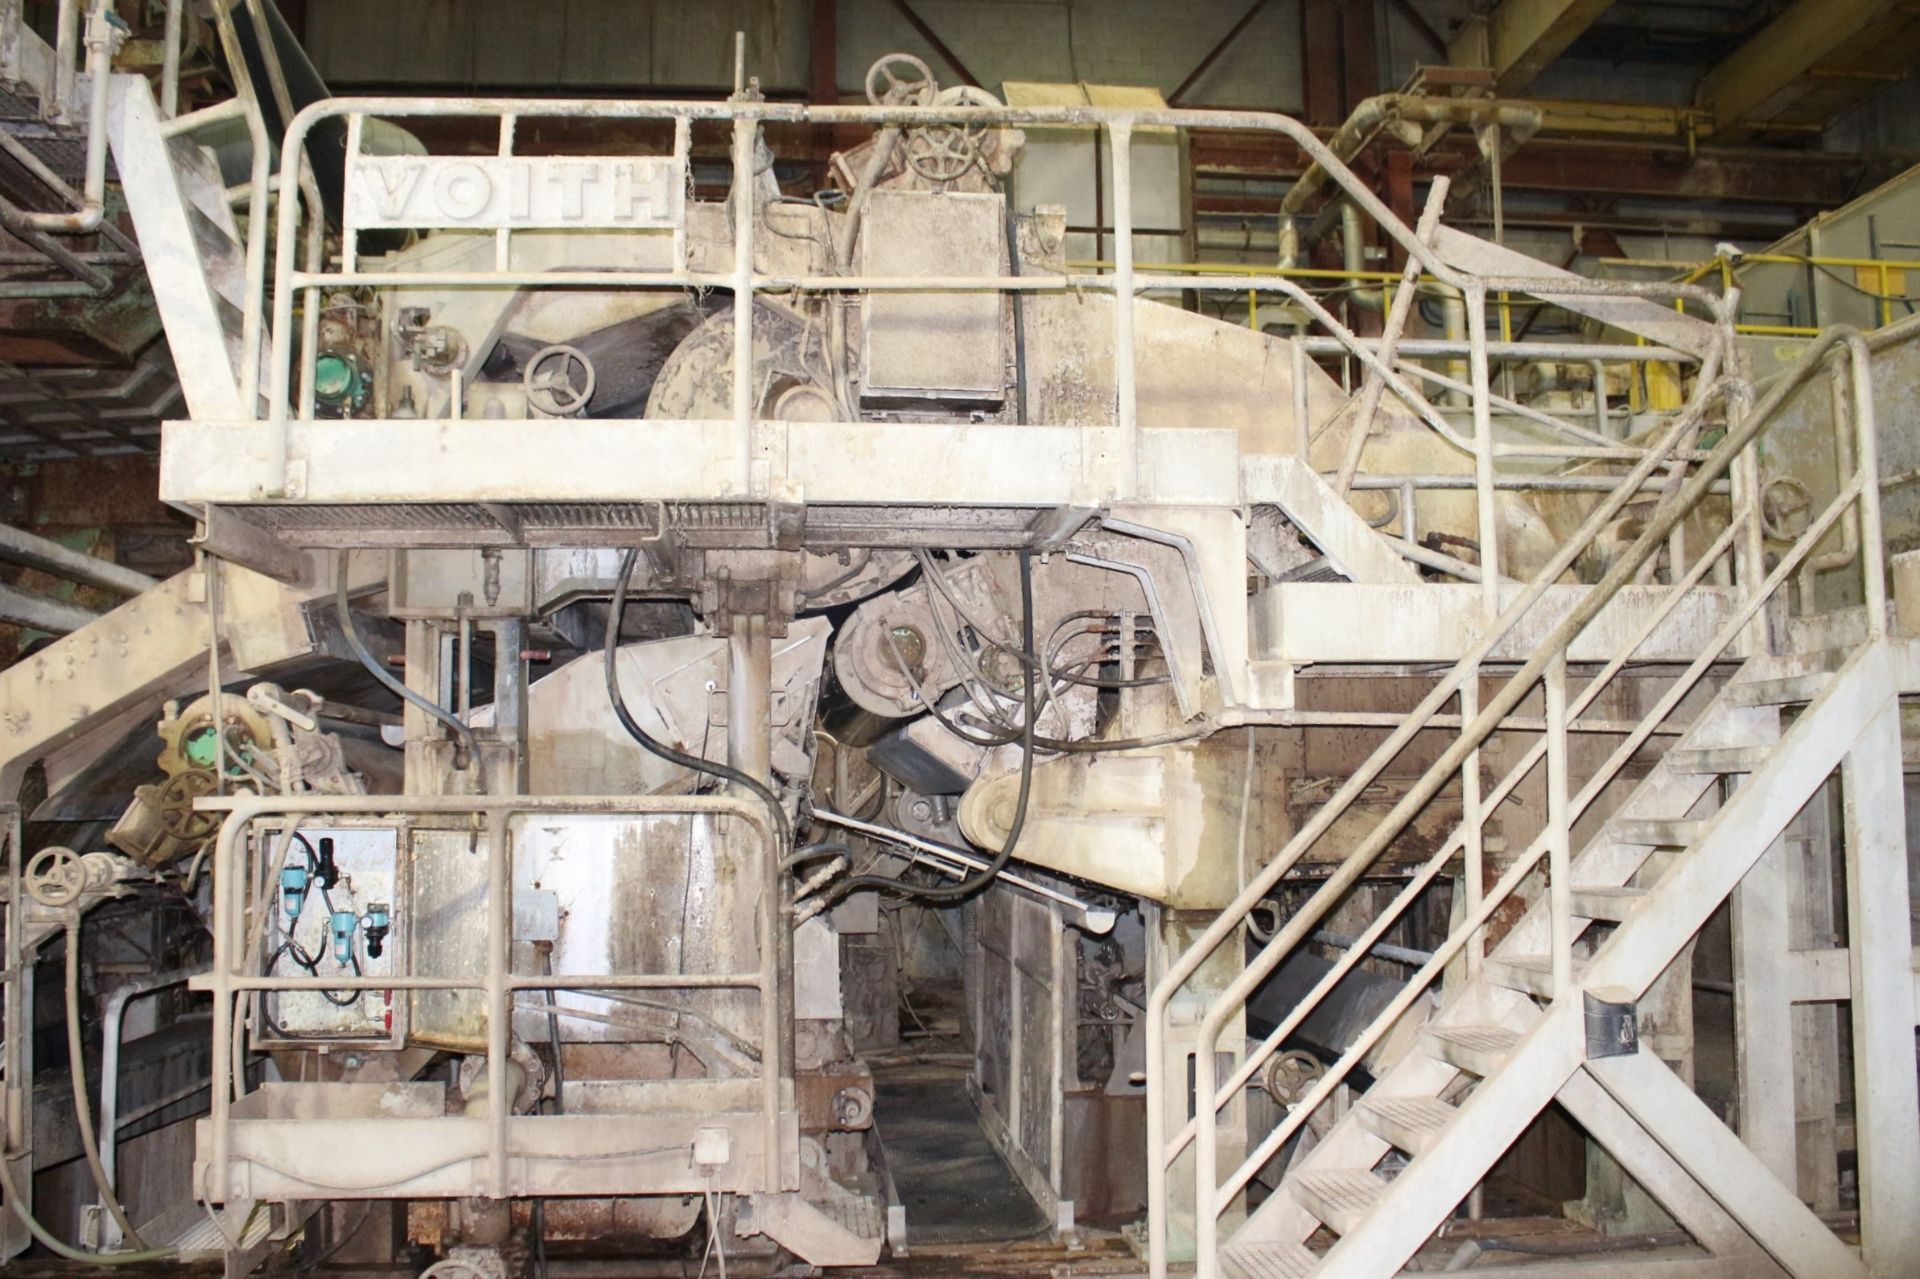 VOITH 104" TRIM YANKEE TISSUE MILL - NOTE: TO BE SOLD BY PRIVATE TREATY, CONTACT AUCTIONEER DIRECT - Image 244 of 273